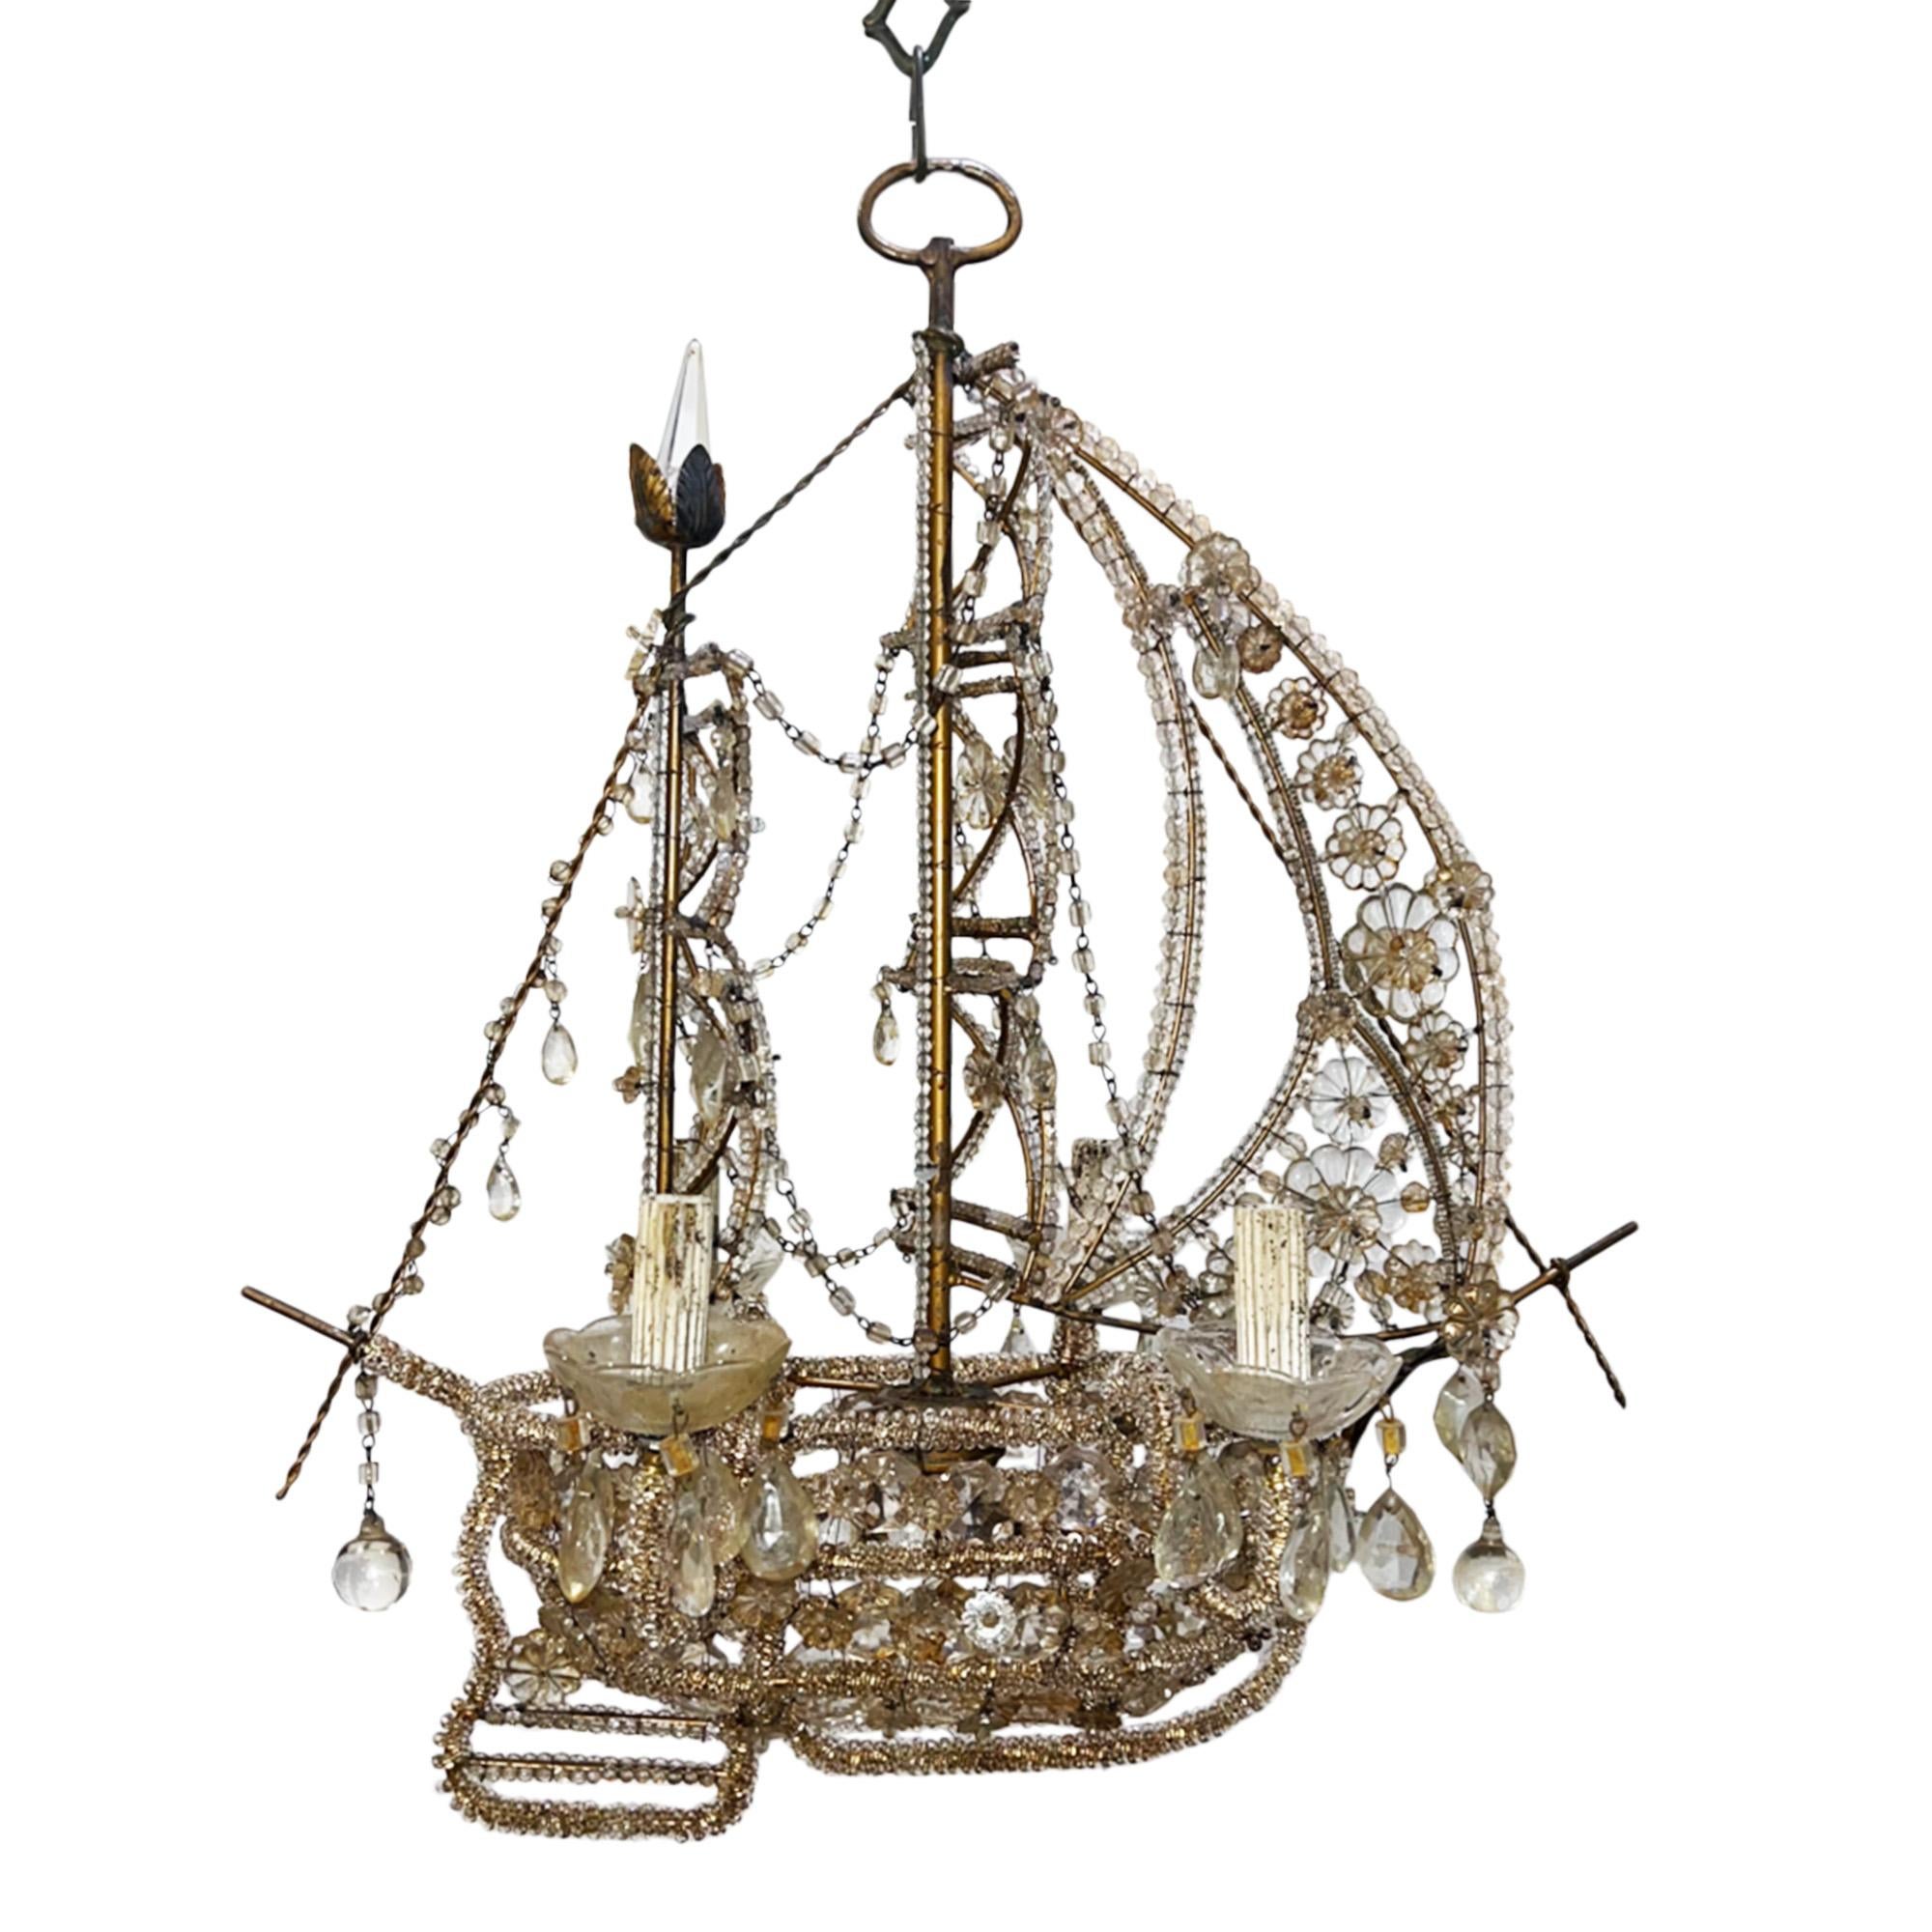 This very decorative chandelier was made in France in the 1950s. It has beautiful beaded detail to create the hull, rigging and sails, with an interesting crystal in the crow's nest. Take a look at all our pictures to see the intricate construction.